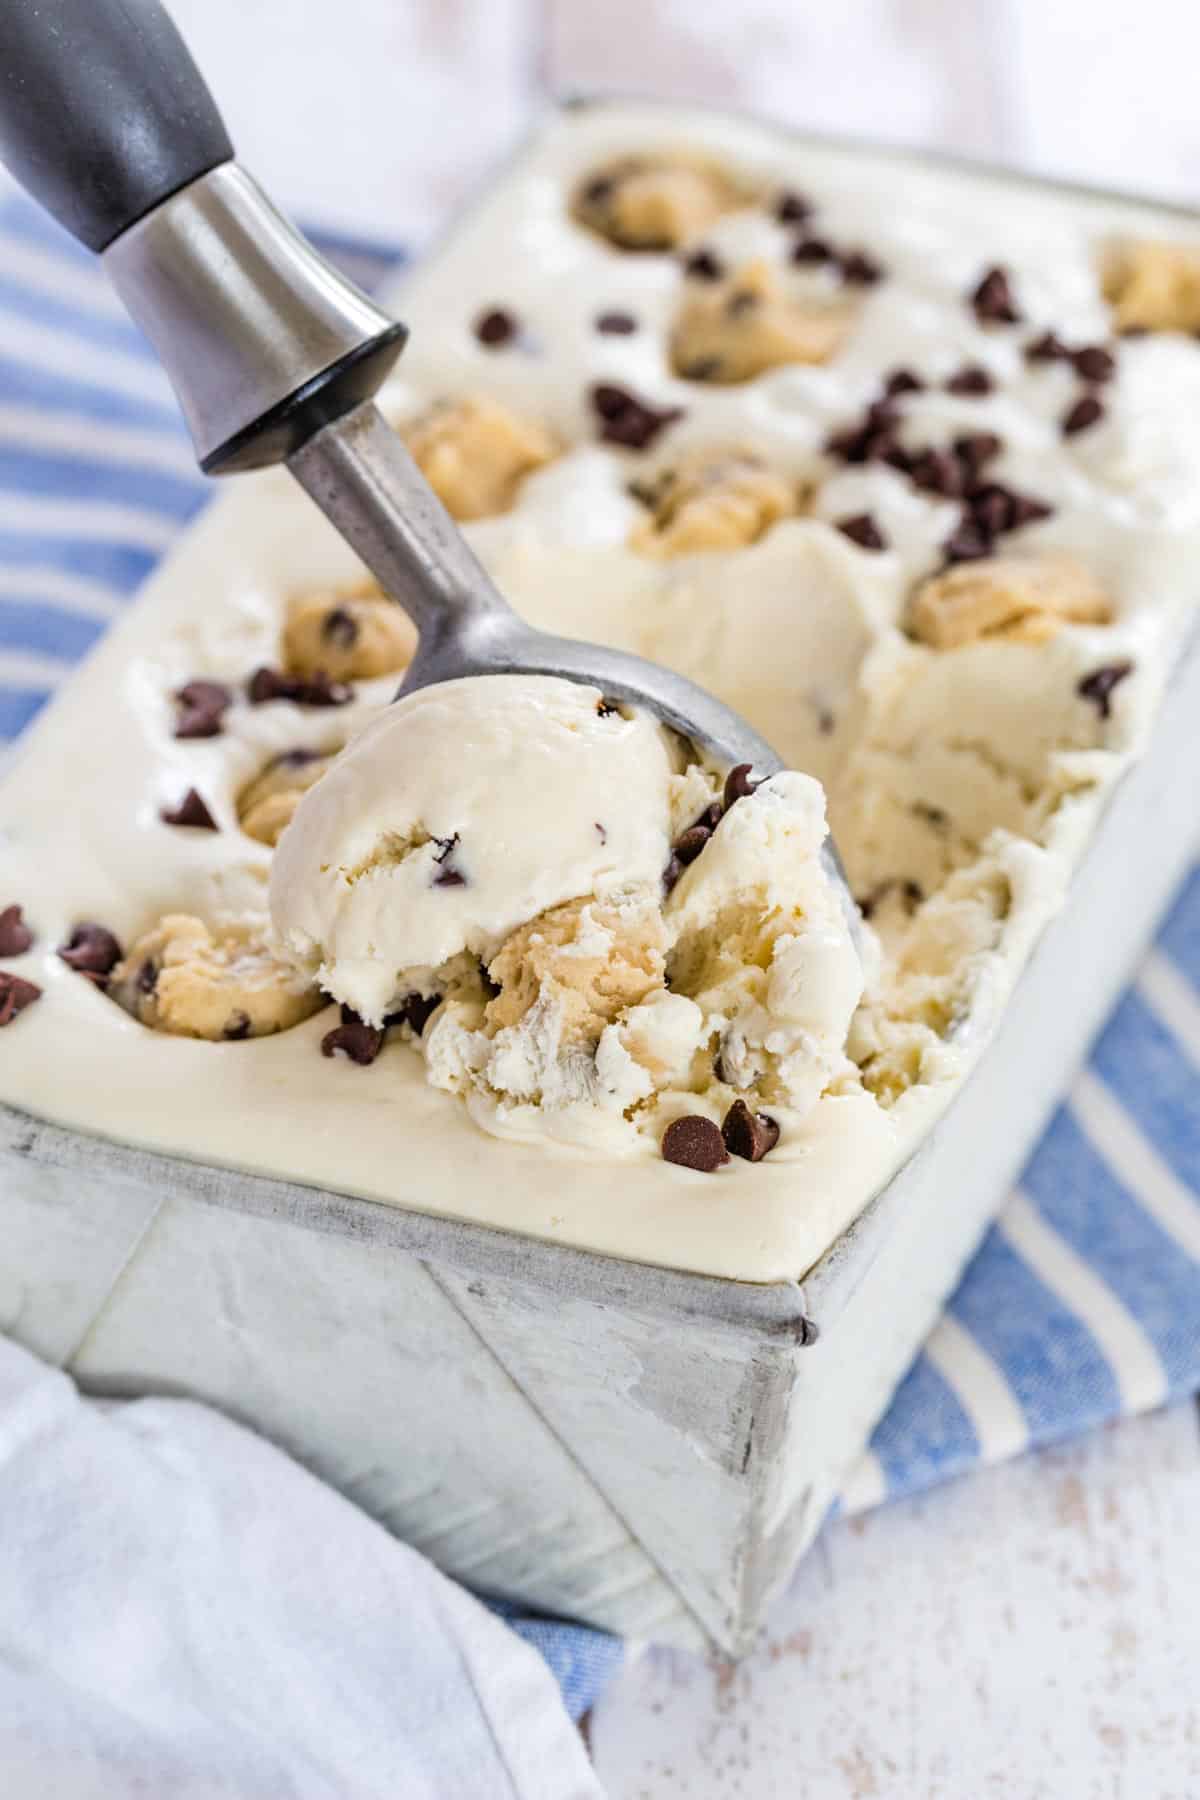 An ice cream scoop serves chocolate chip cookie dough no-churn ice cream from a metal loaf pan, topped with chunks of cookie dough and chocolate chips.